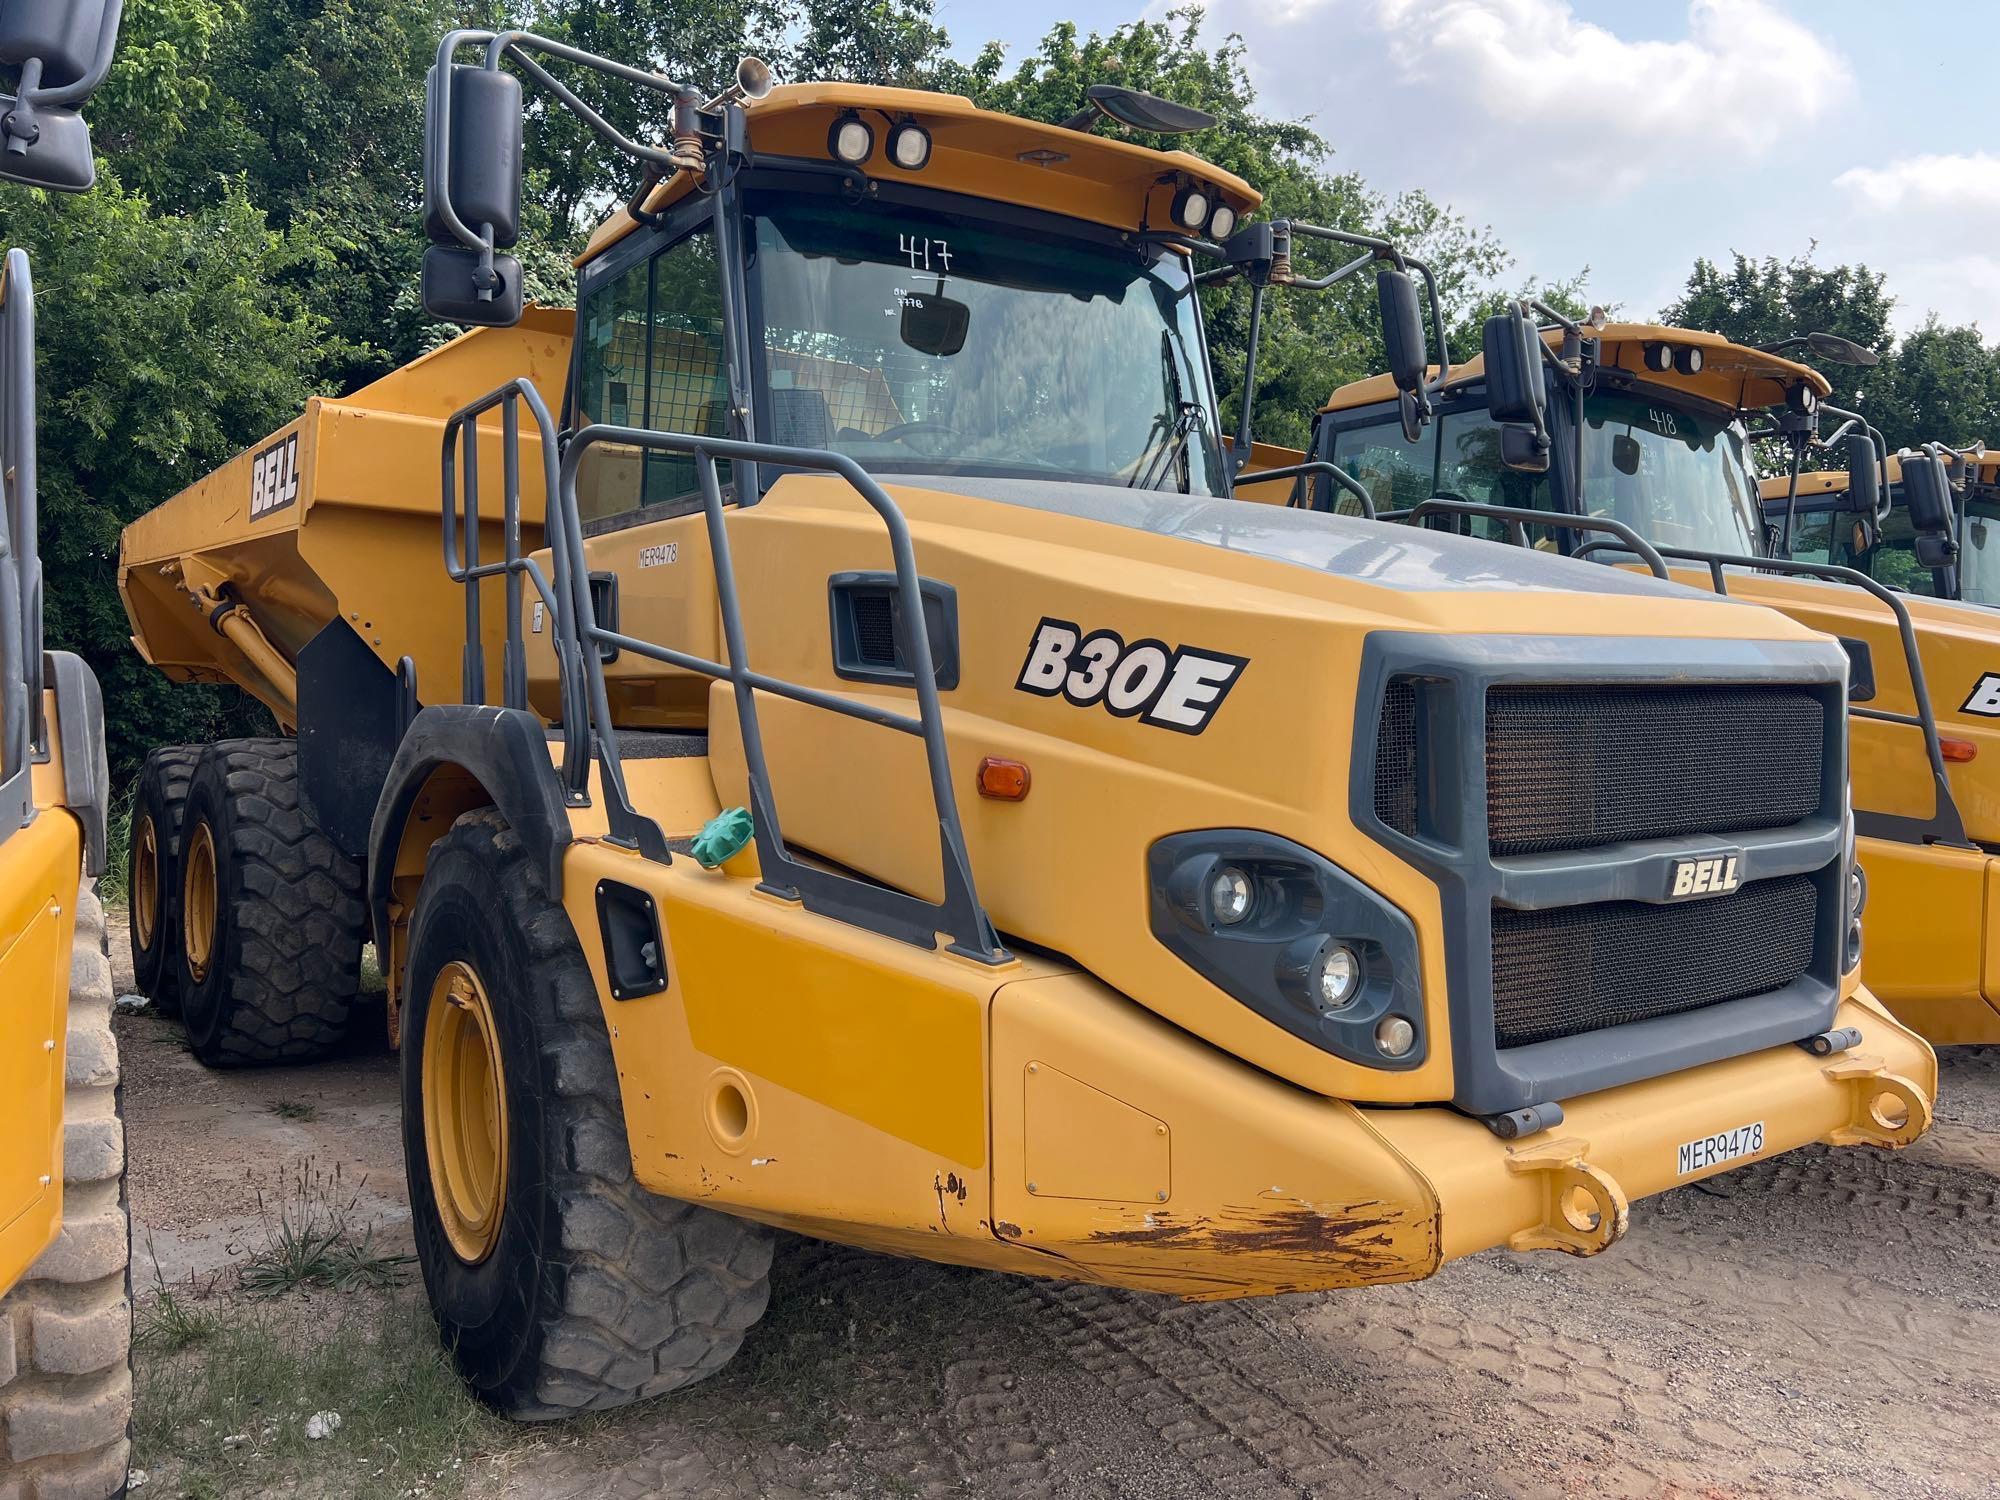 2017 BELL B30E ARTICULATED HAUL TRUCK SN:2007778 6x6, powered by diesel engine, equipped with Cab,